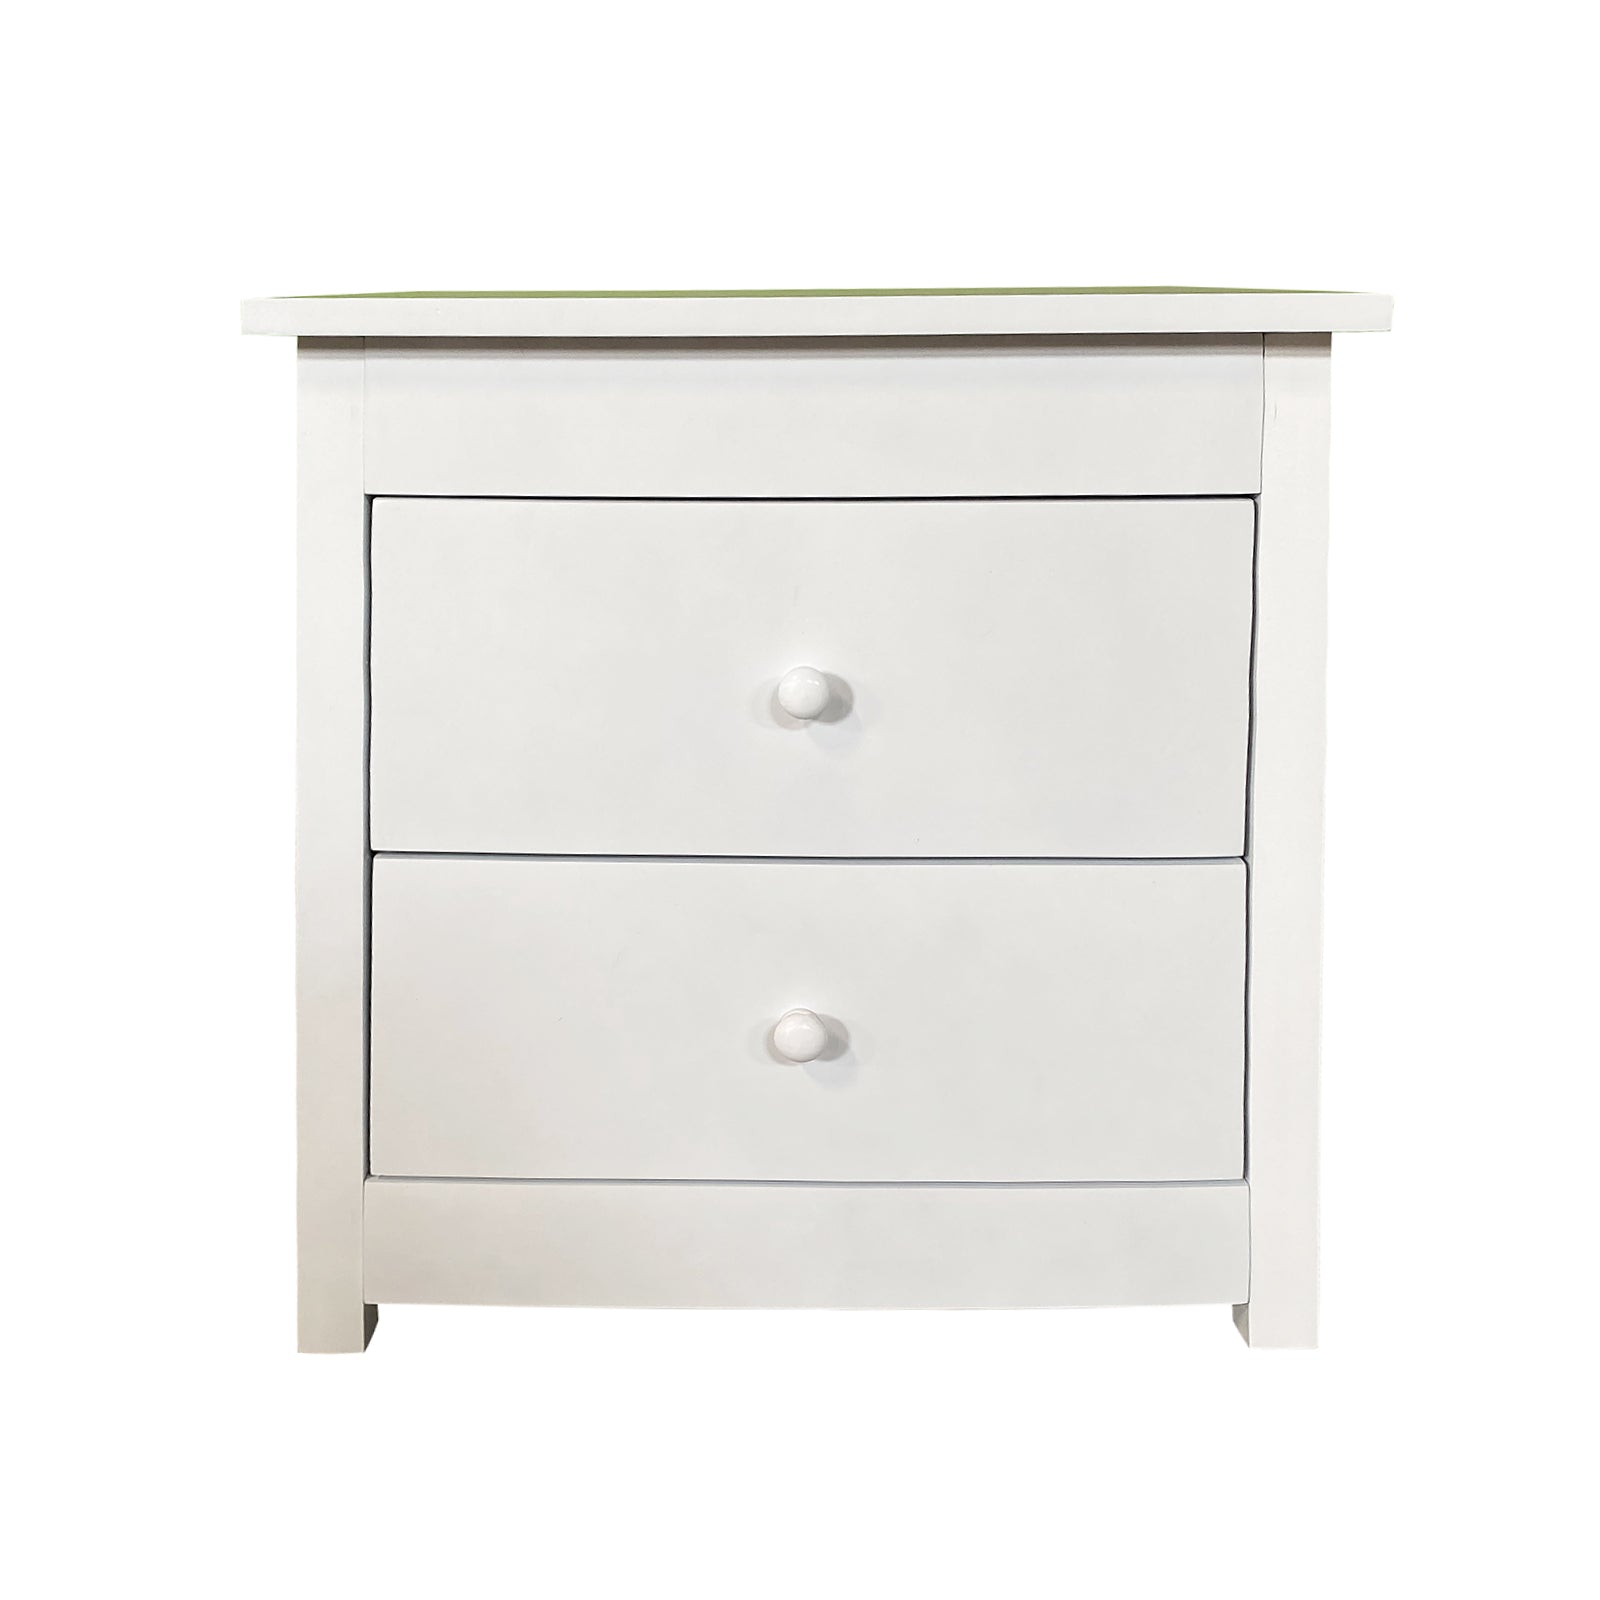 Milano Decor Bedside Table Byron Bay White Storage Cabinet Bedroom - Two Pack - White